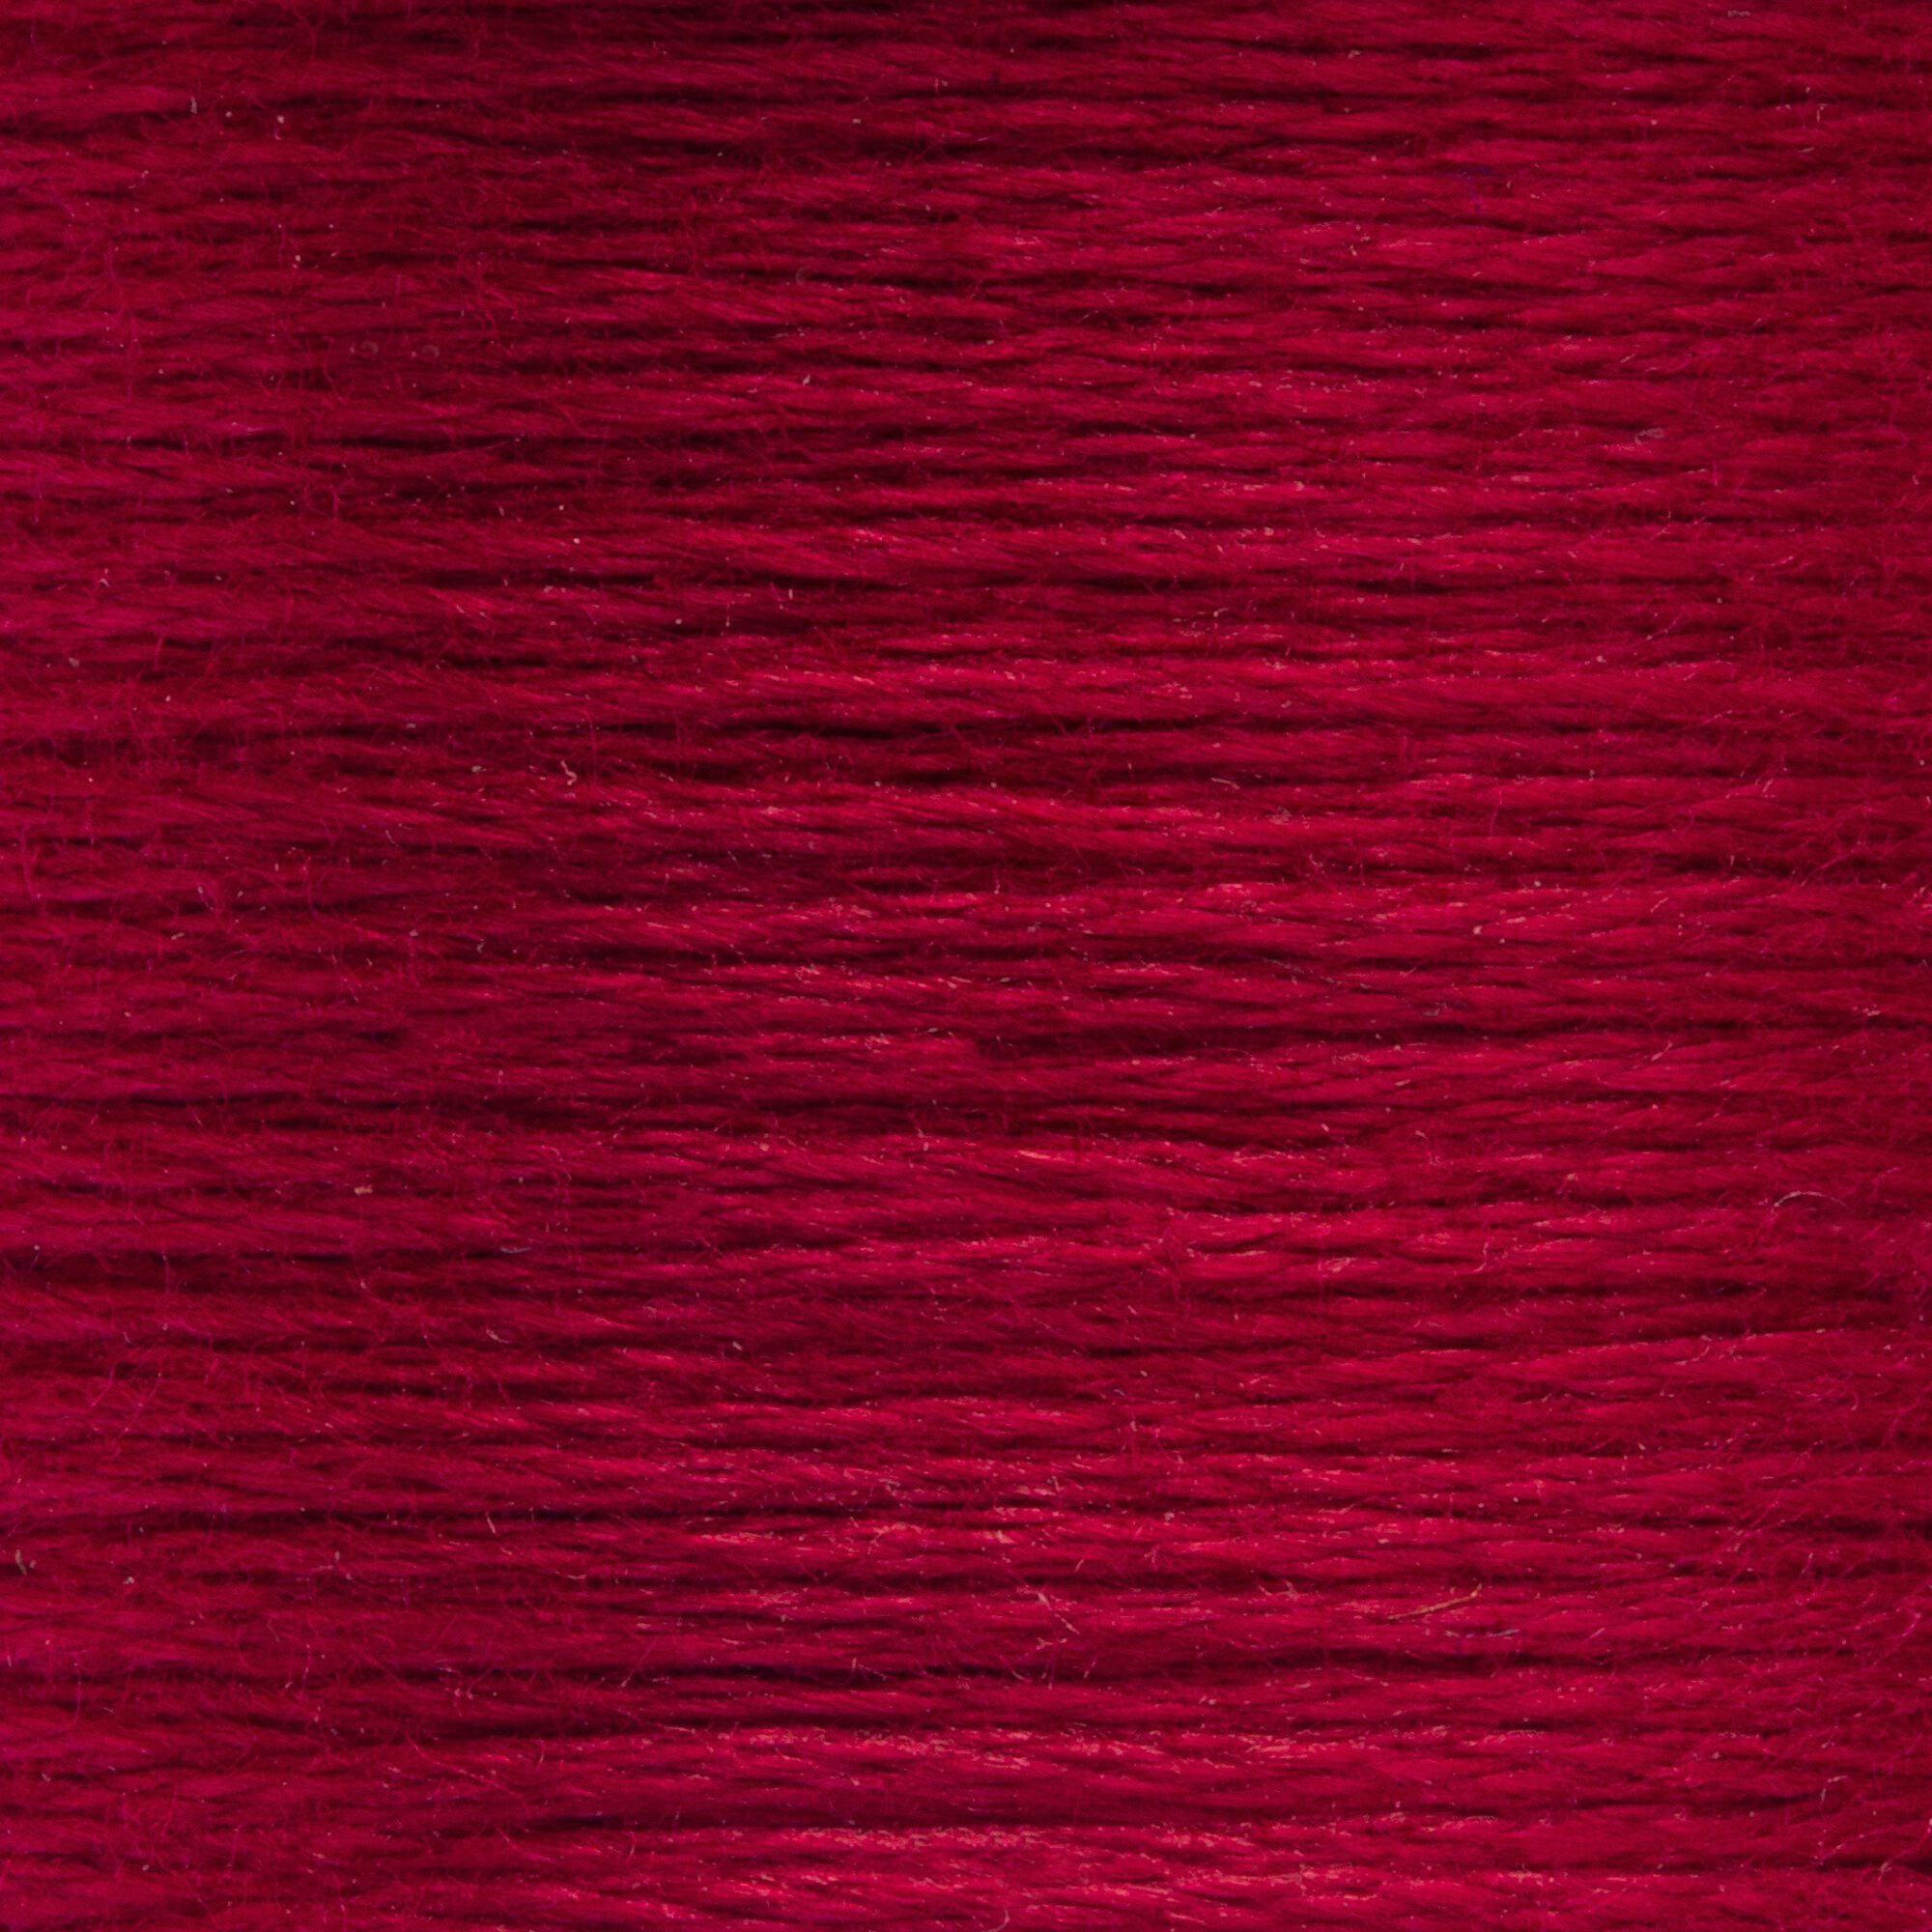 Anchor Embroidery Floss in Cherry Red Med